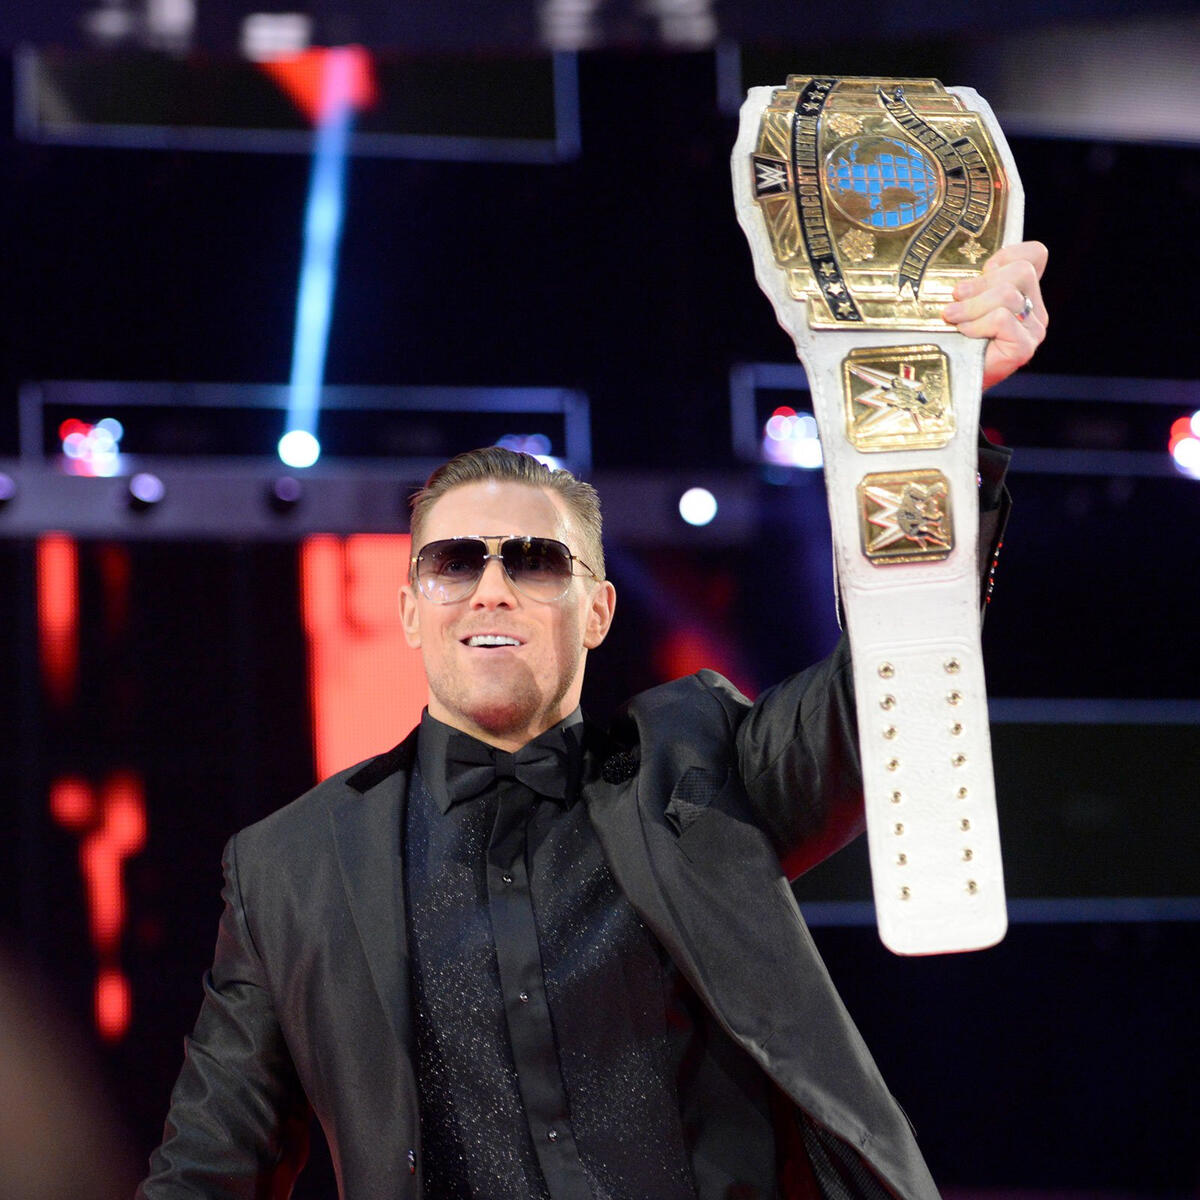 ... and the man who just won the Intercontinental Championship for the seventh time, The Miz.